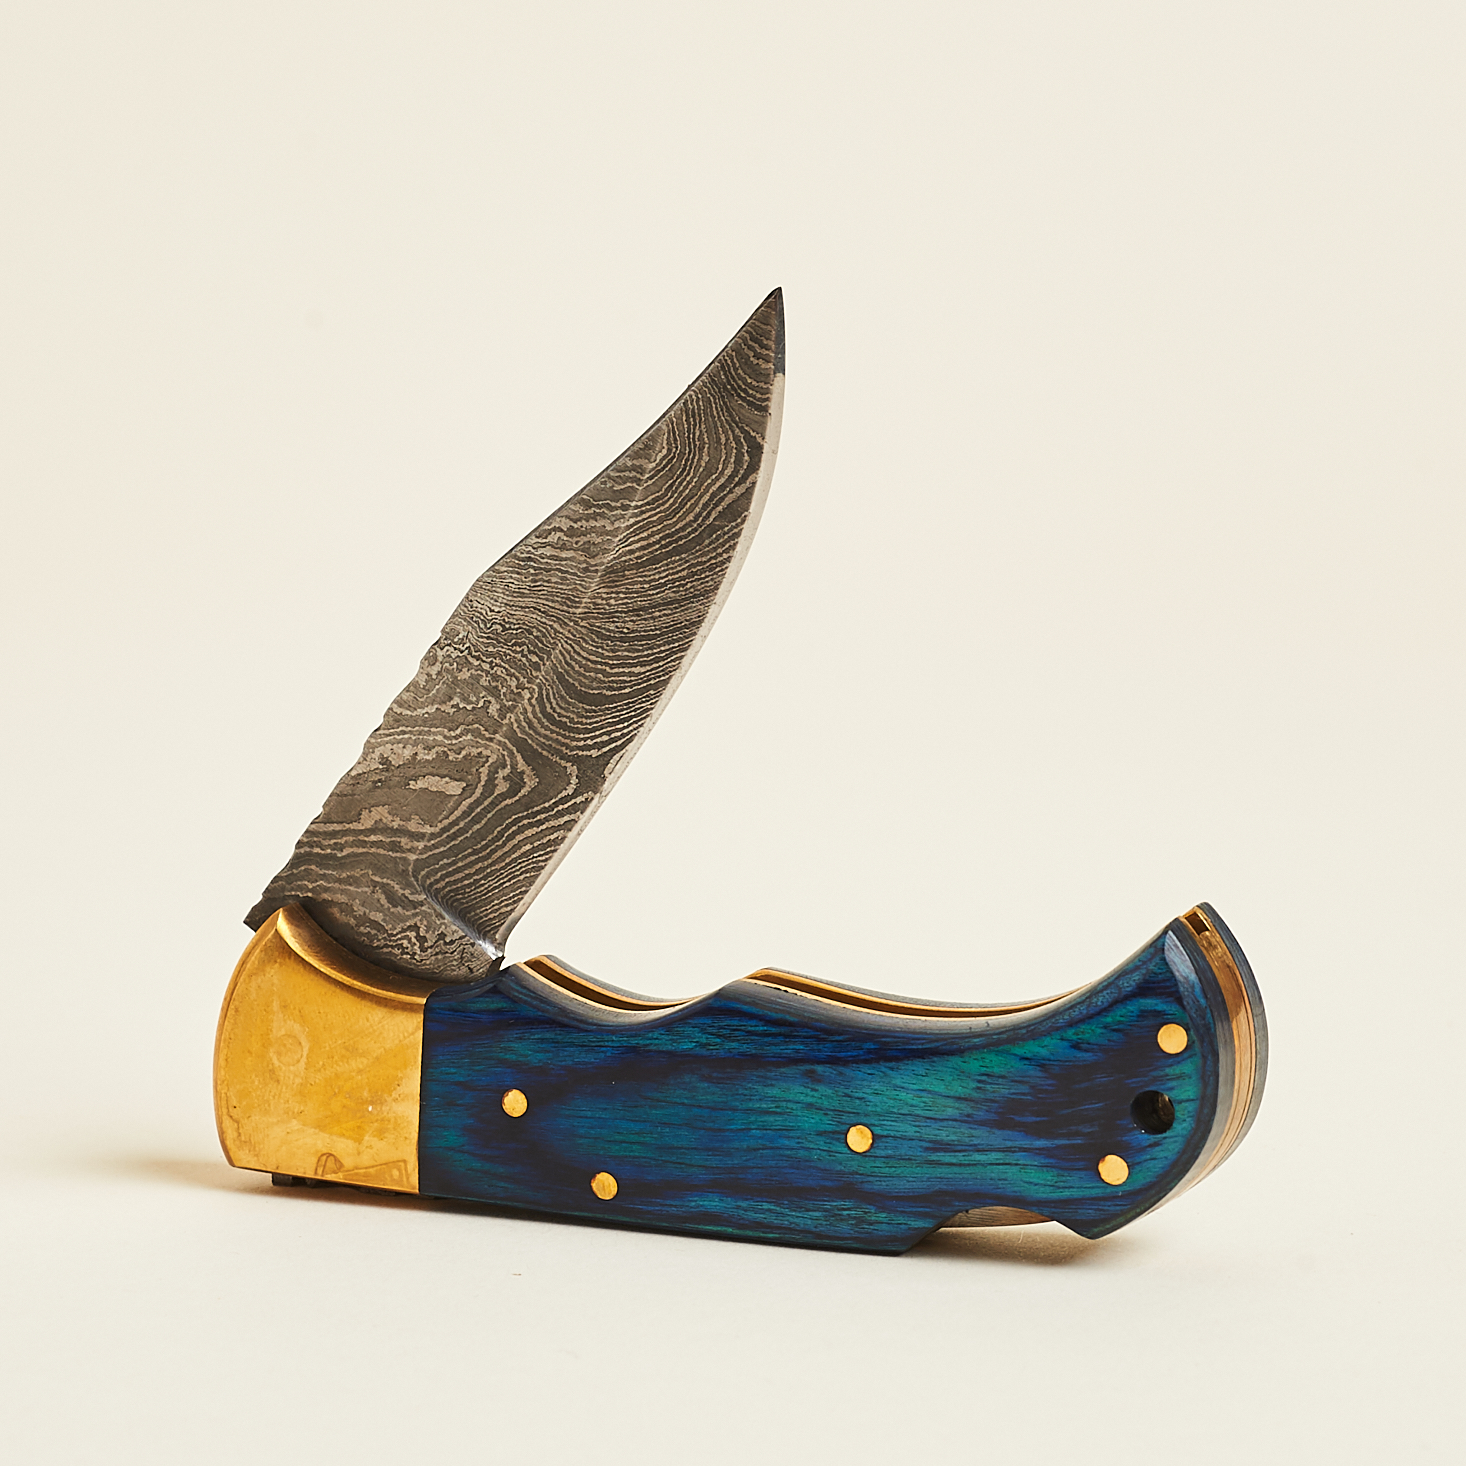 damascus steel knife with blue wood handle and brass accents